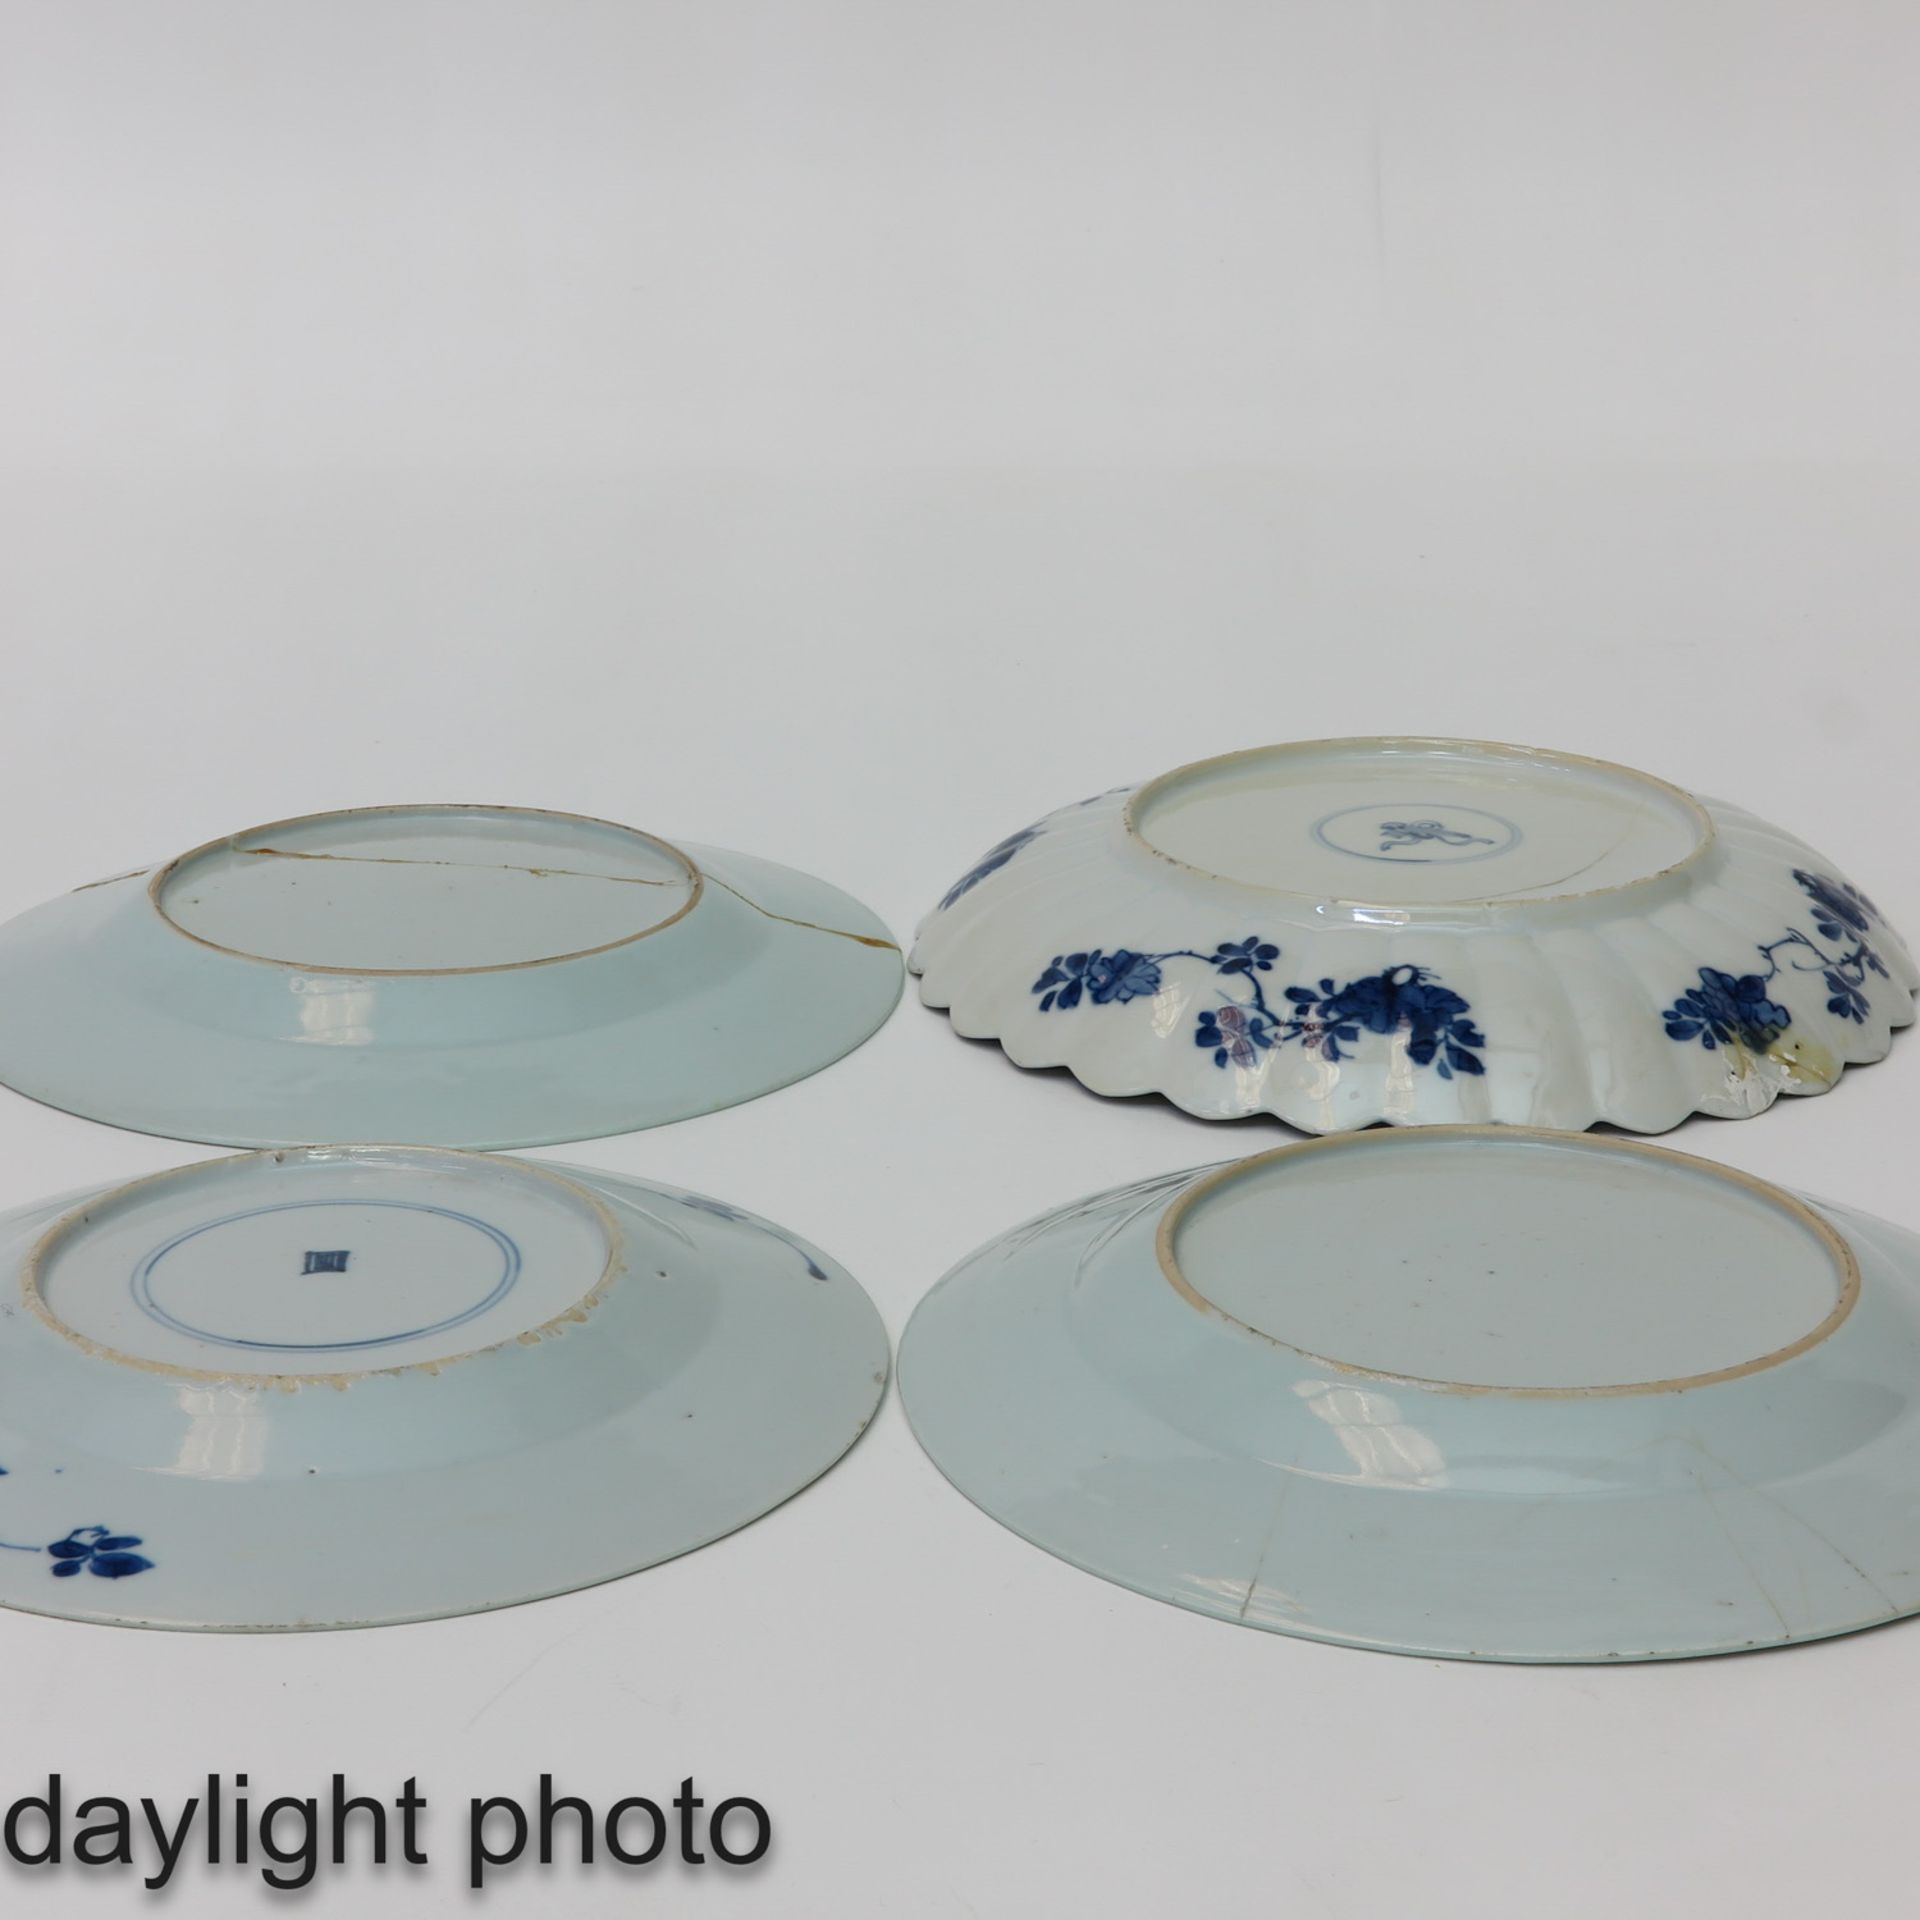 A Lot of 4 Blue and White Plates - Image 8 of 10